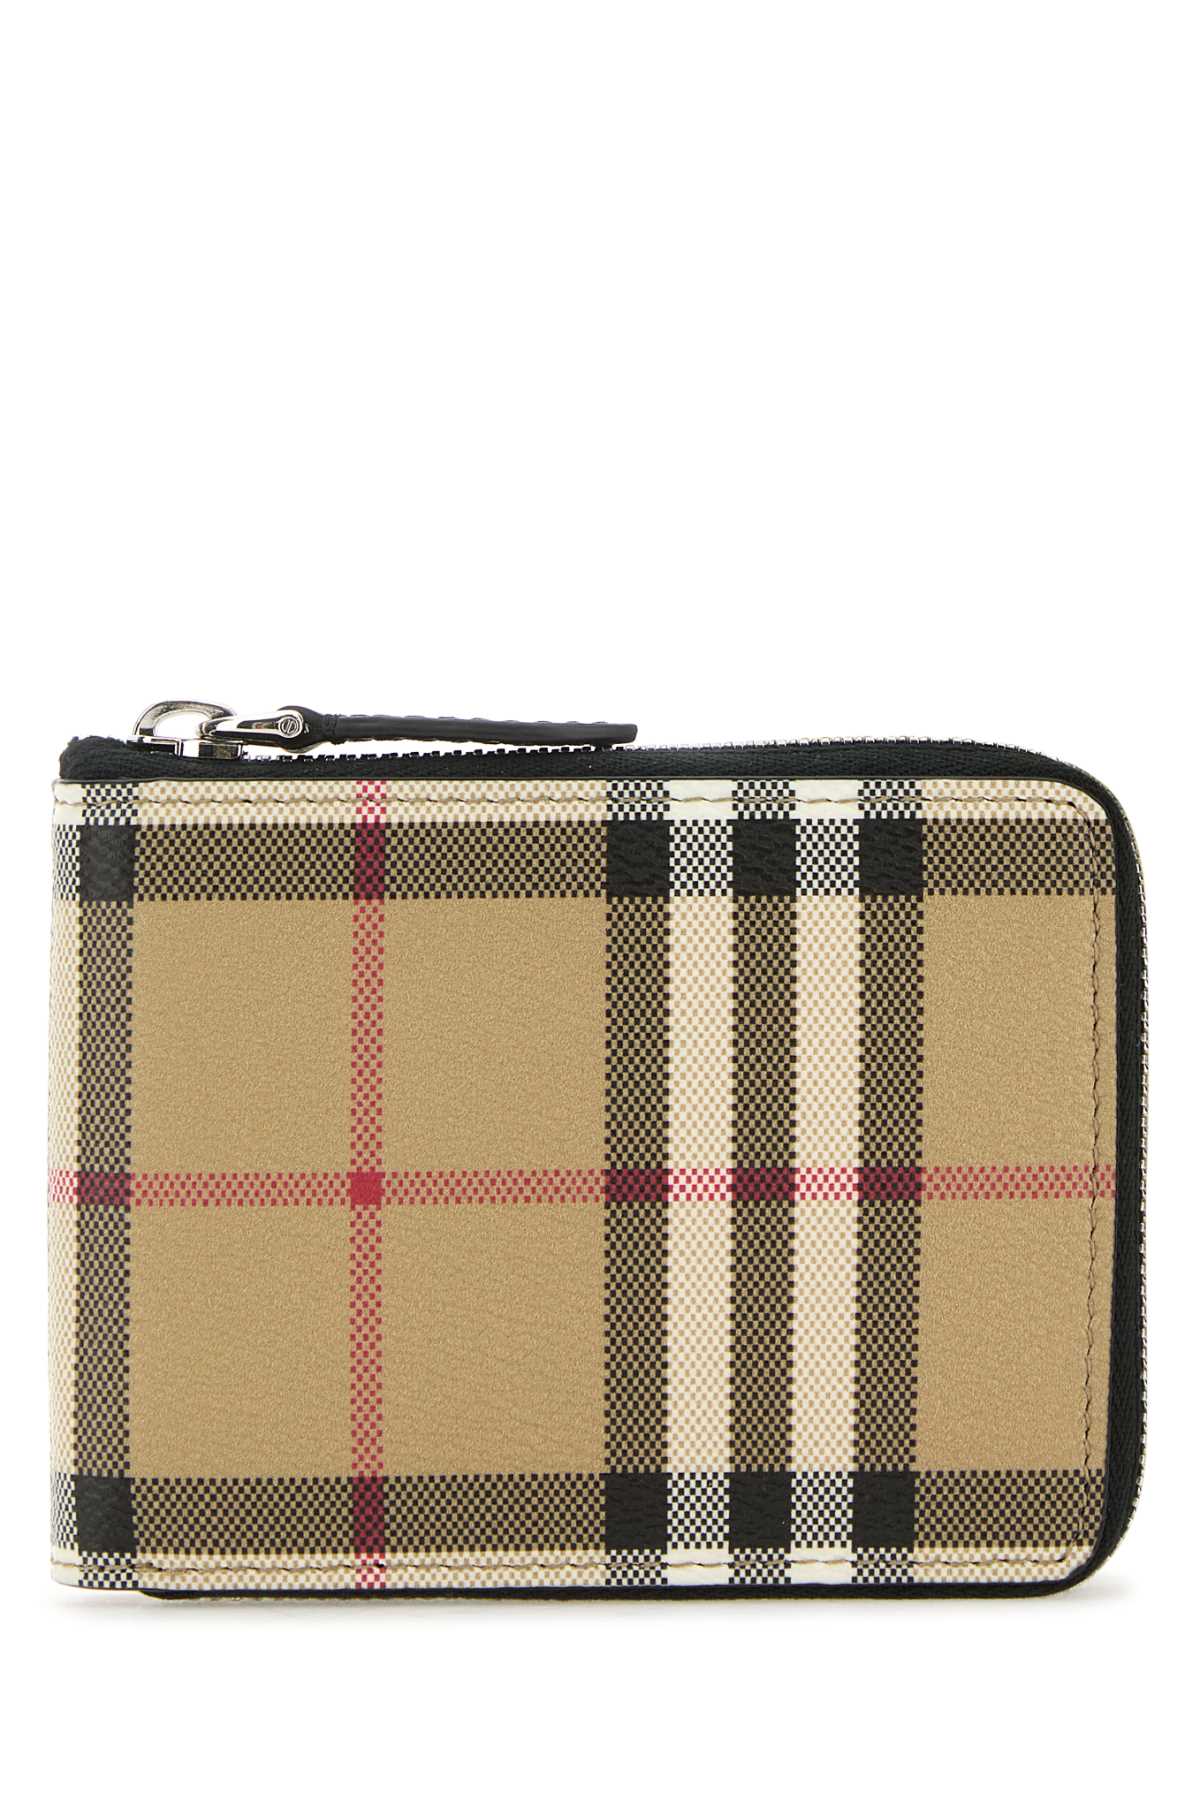 Shop Burberry Printed Canvas Wallet In Archivebeige